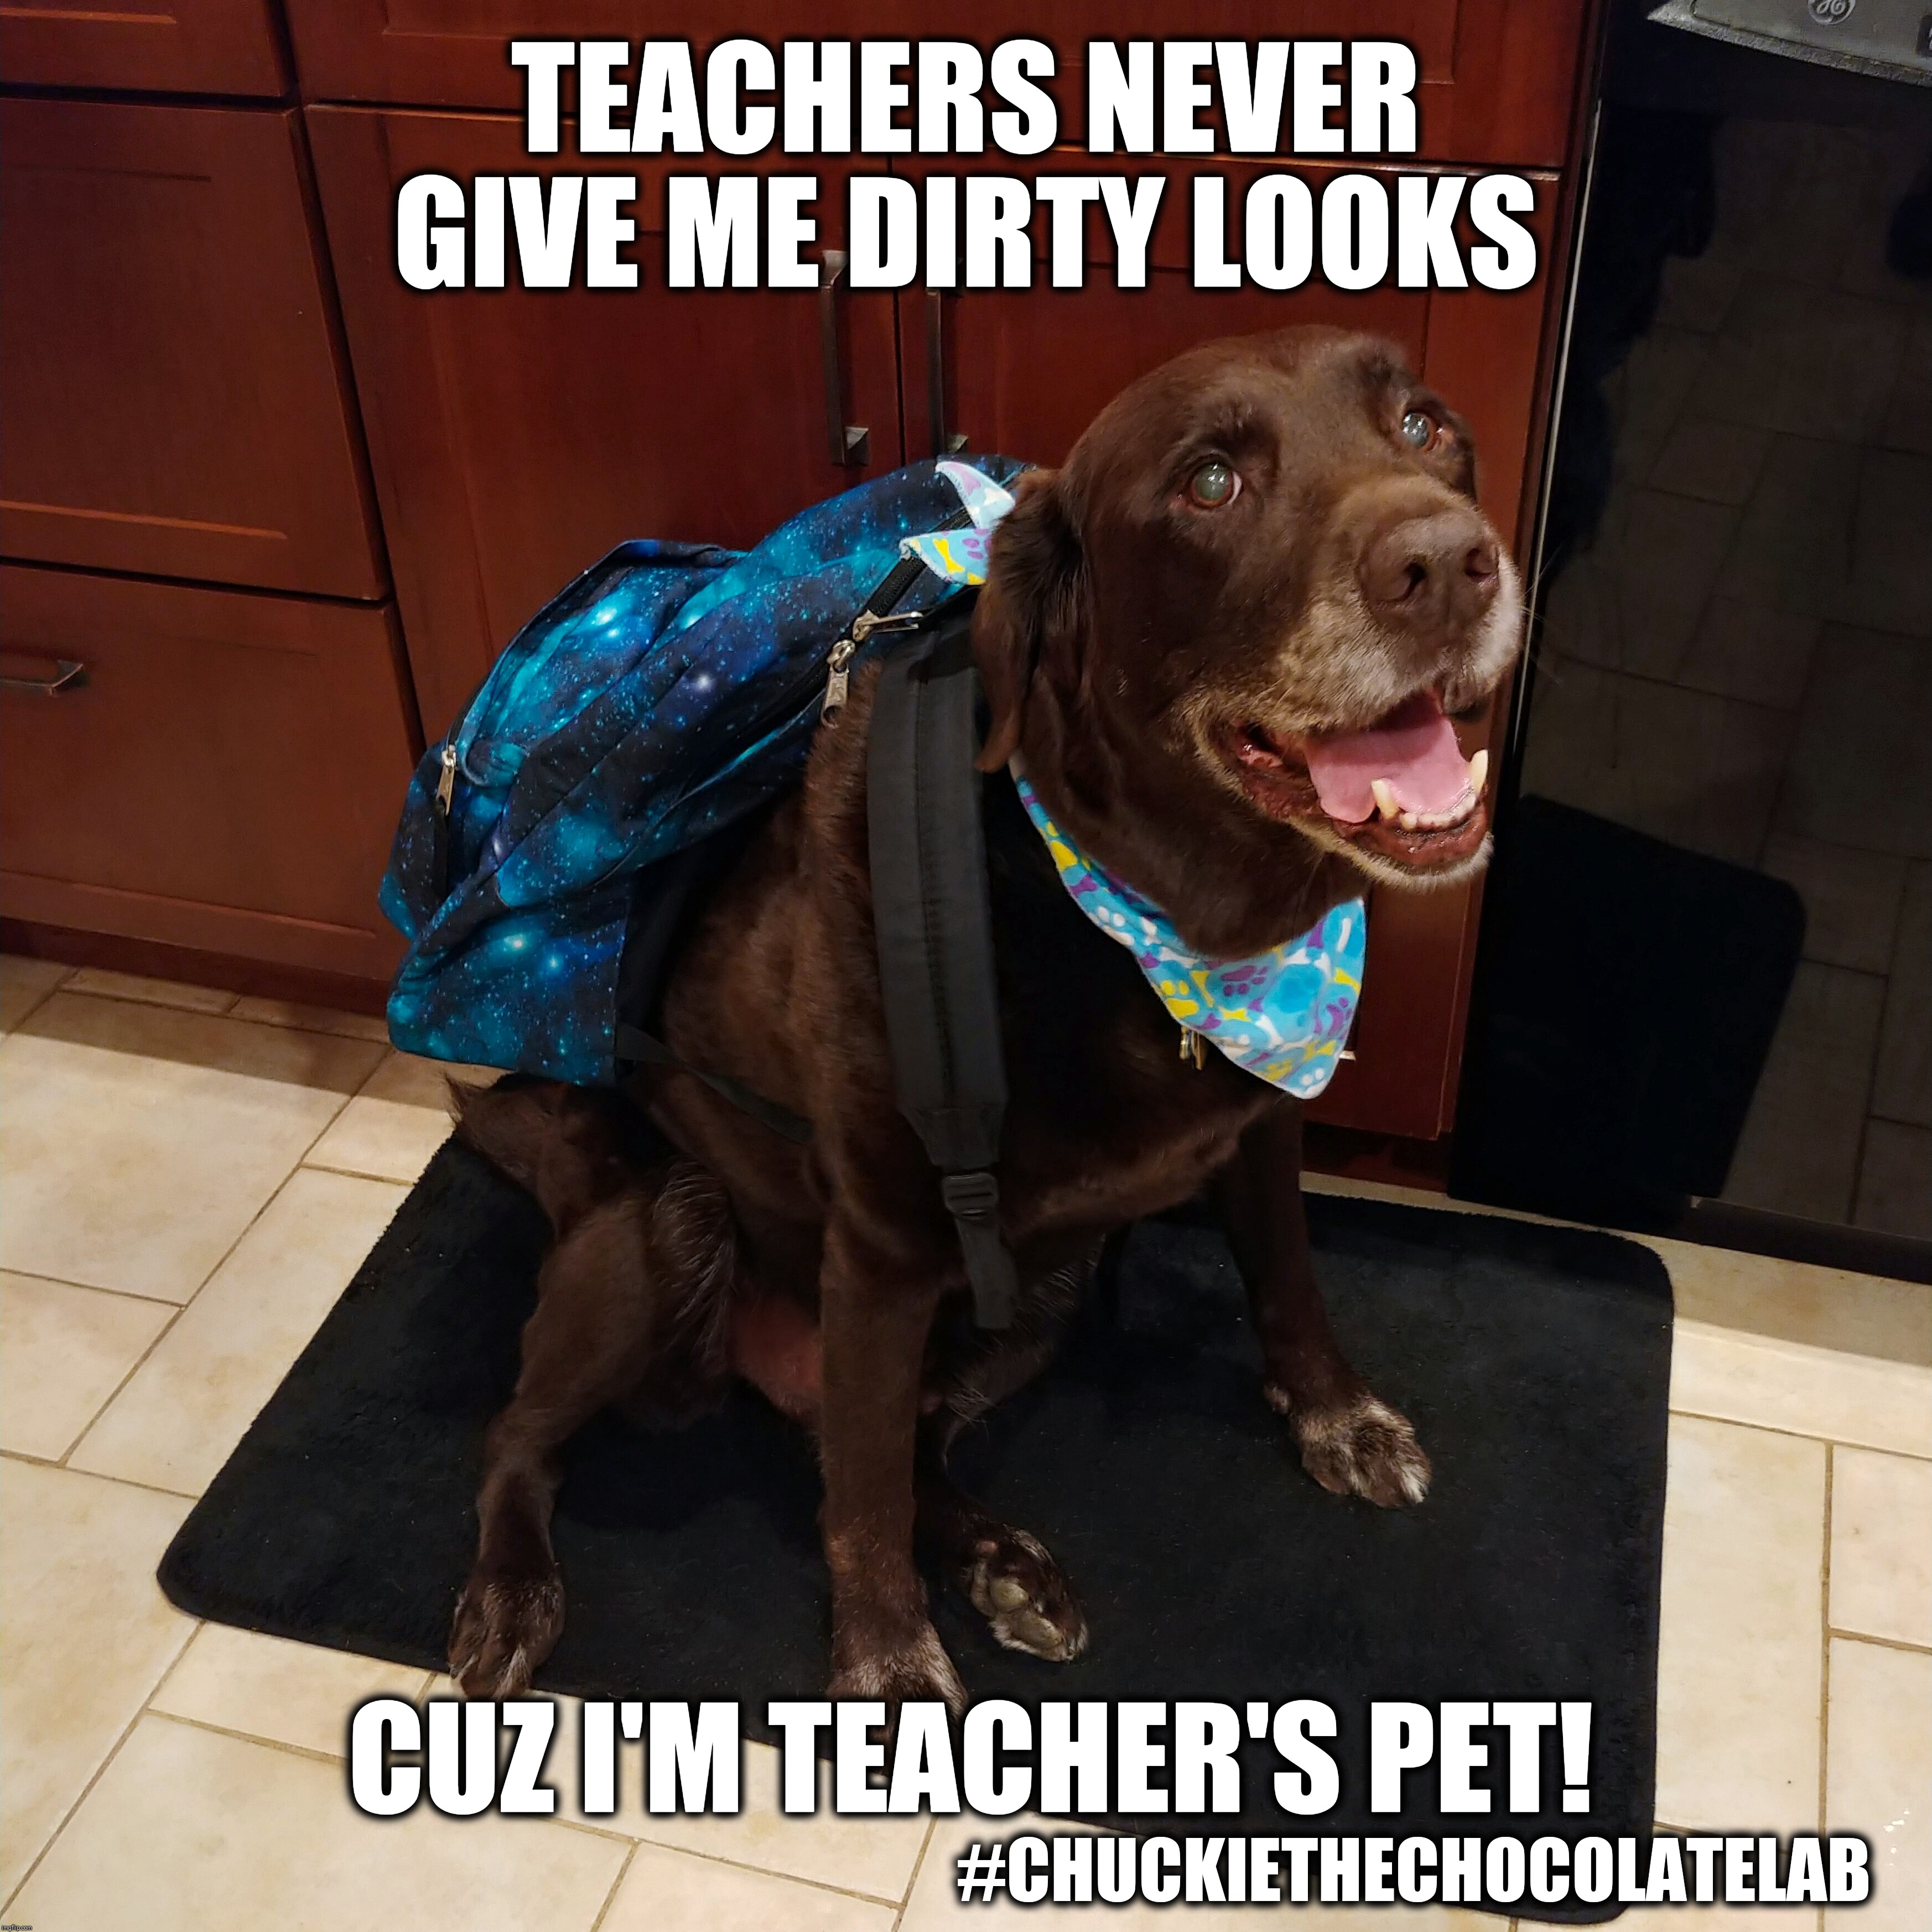 Teacher's pet | TEACHERS NEVER GIVE ME DIRTY LOOKS; CUZ I'M TEACHER'S PET! #CHUCKIETHECHOCOLATELAB | image tagged in chuckie the chocolate lab,dogs,back to school,first day of school,funny,cute | made w/ Imgflip meme maker